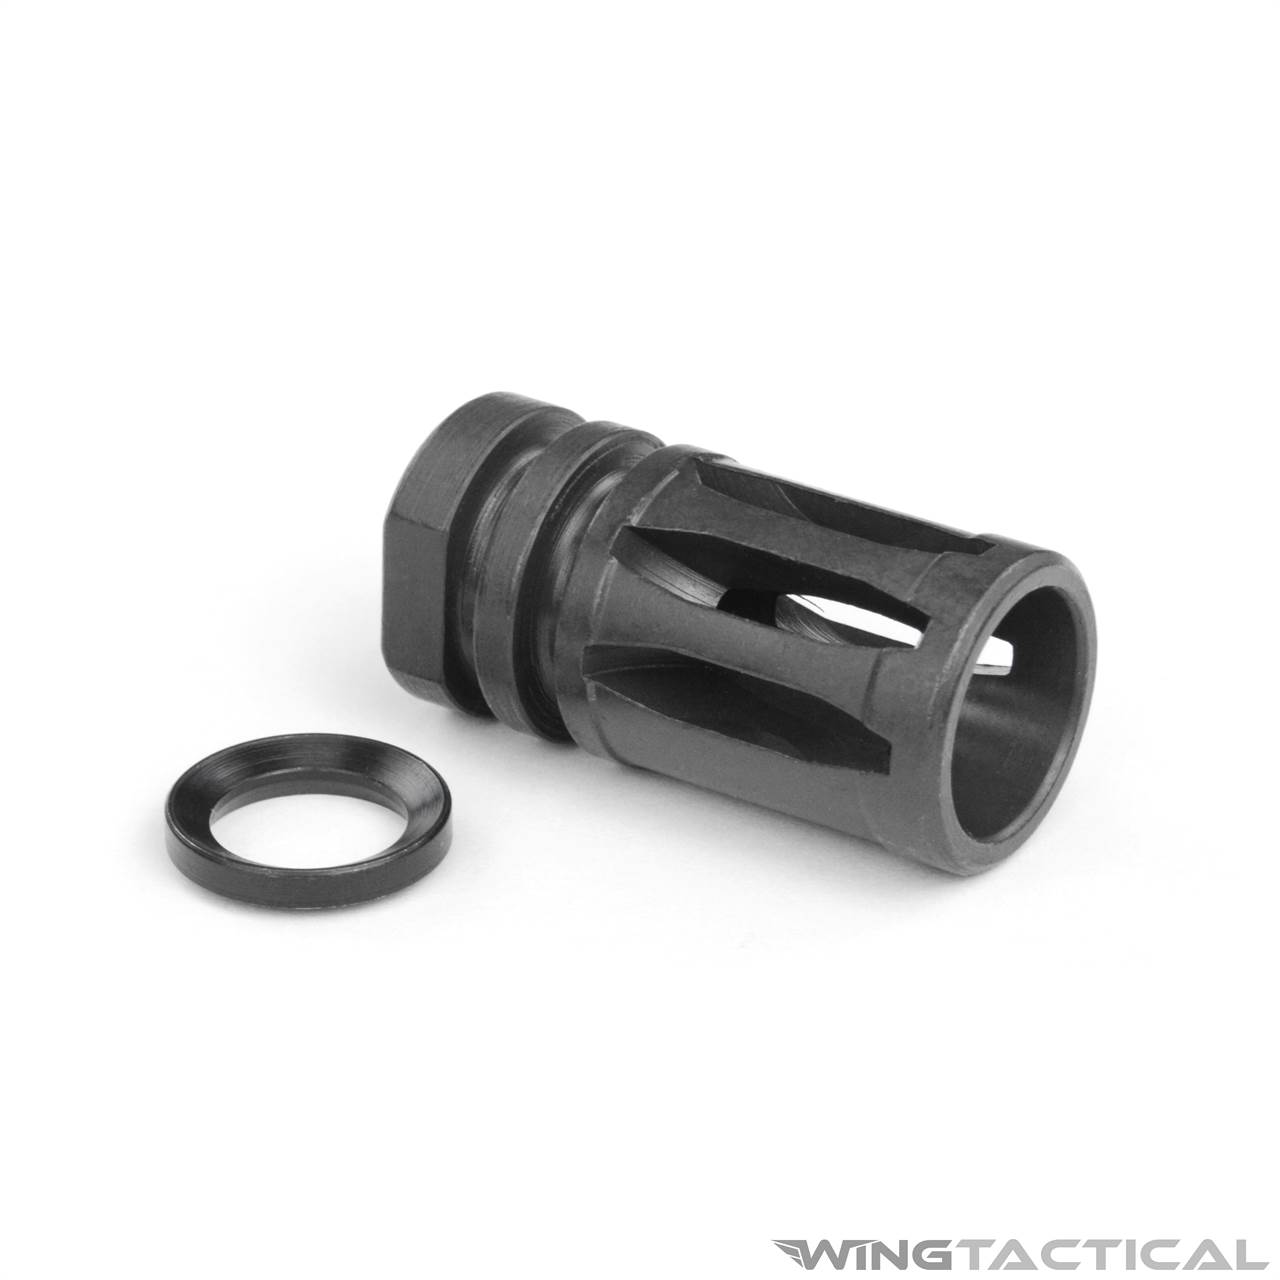 1/2X28 THREAD SPIKE STYLE MUZZLE BRAKE-COLOR OPTIONS